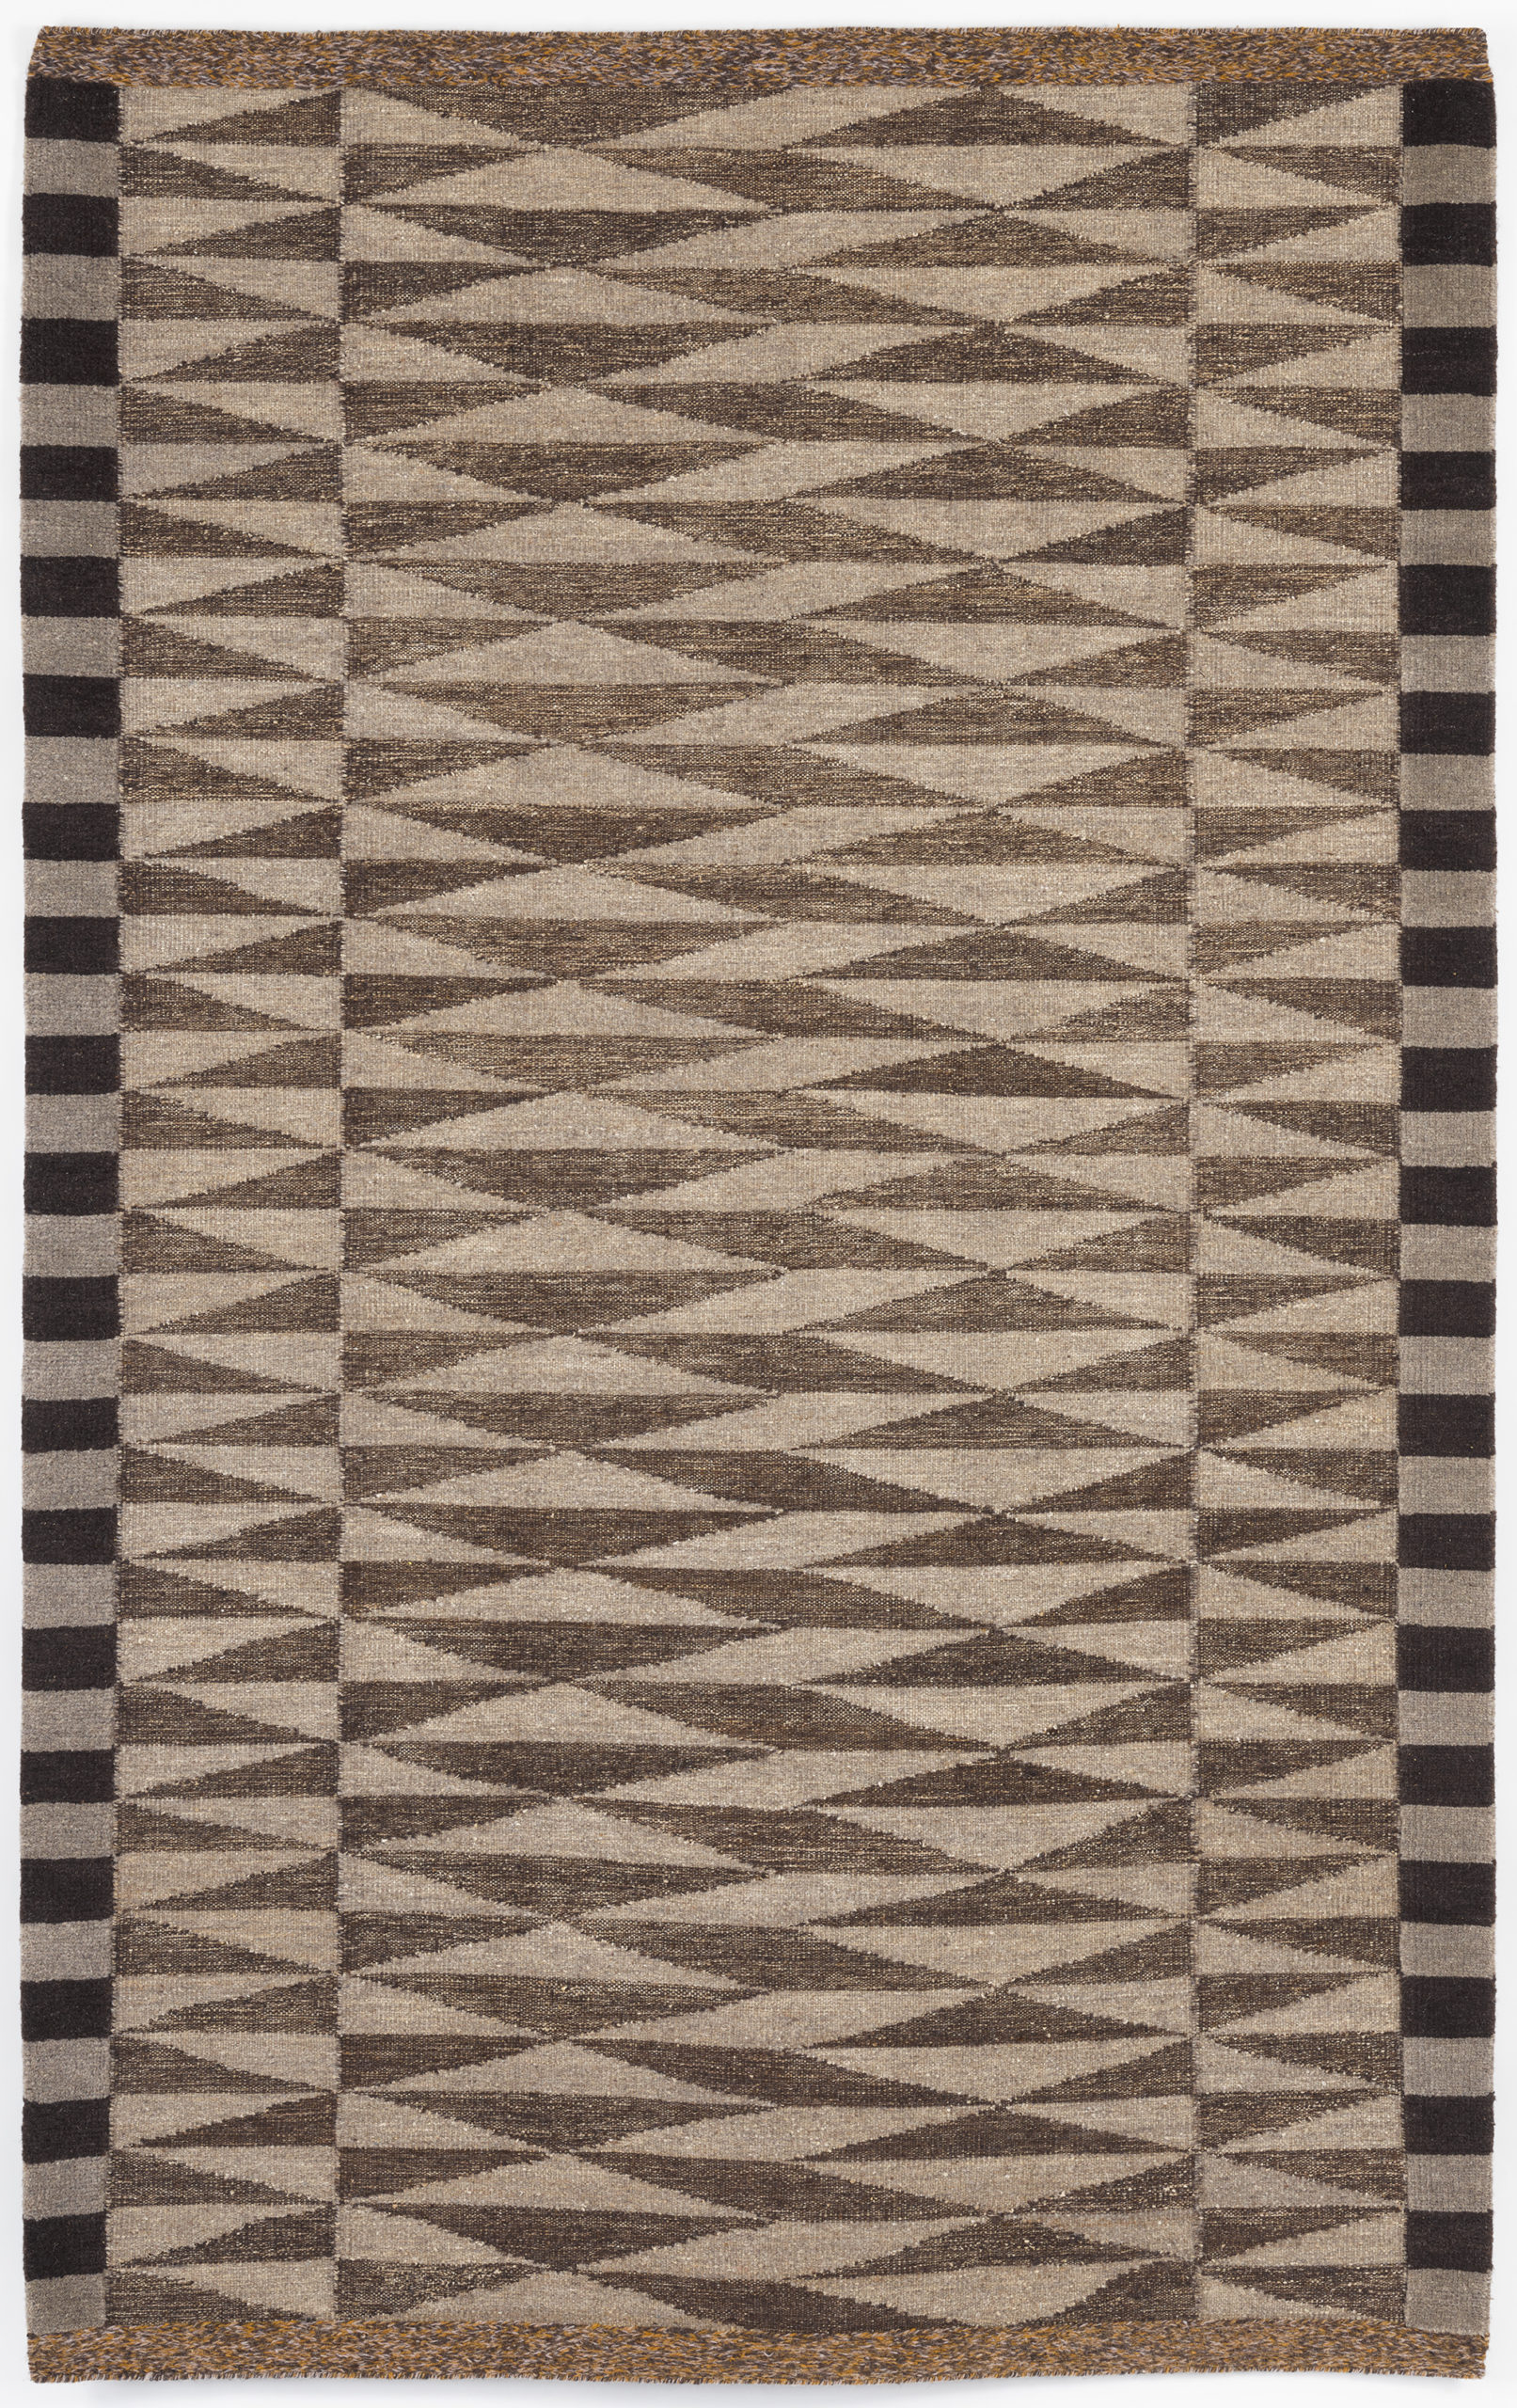 crosby_street_studios_products_CSS_Lineage_Karoo_FullRug-scaled-1